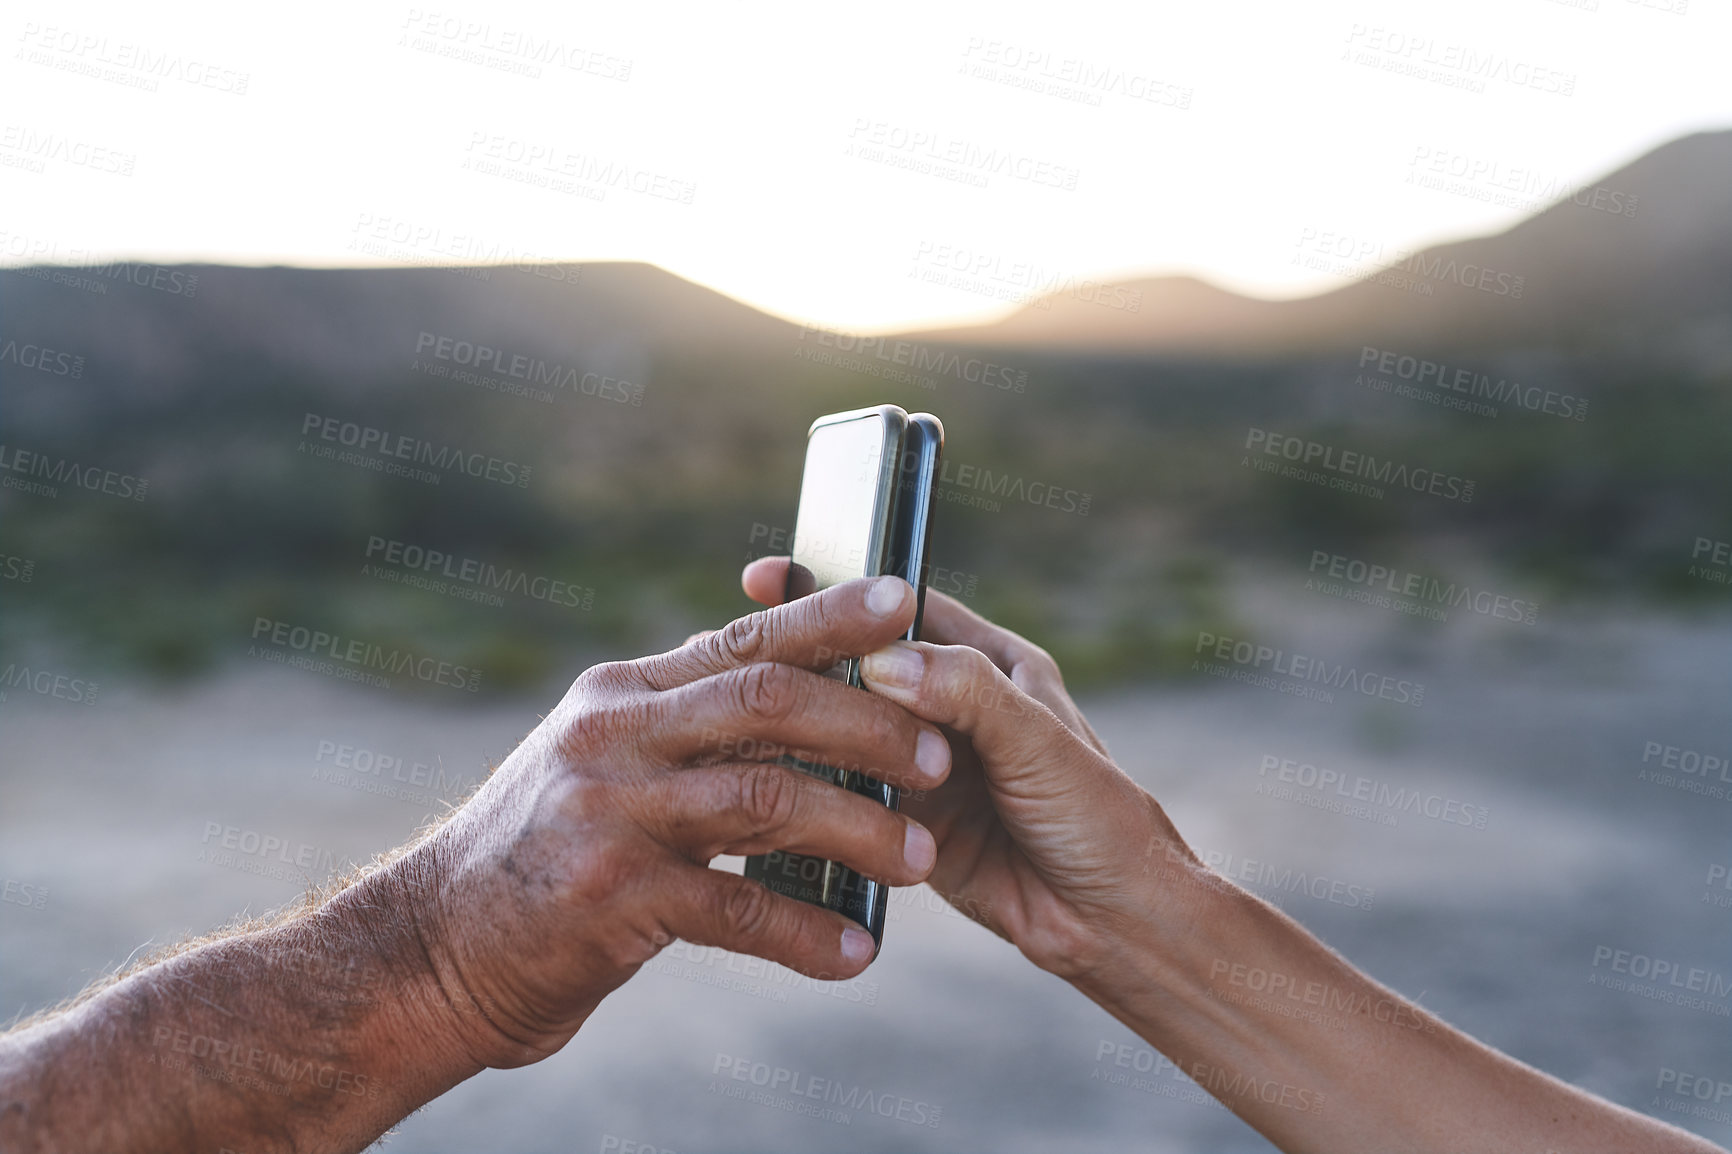 Buy stock photo Shot of an unrecognisable man and woman pairing their smartphones outdoors